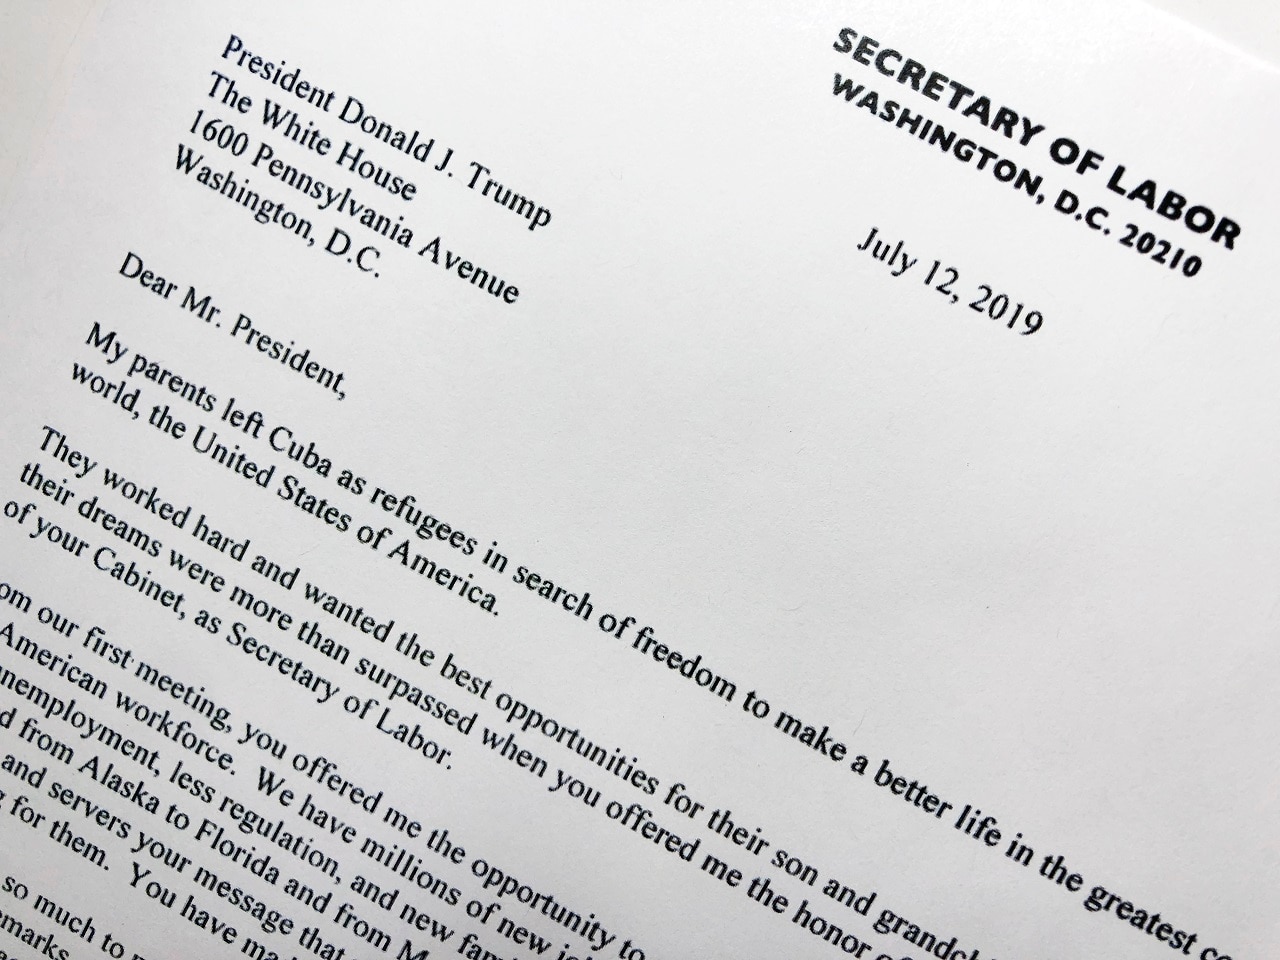 Part of the resignation letter from Labor Secretary Alex Acosta to President Donald Trump is photographed in Washington, Friday, July 12, 2019. 